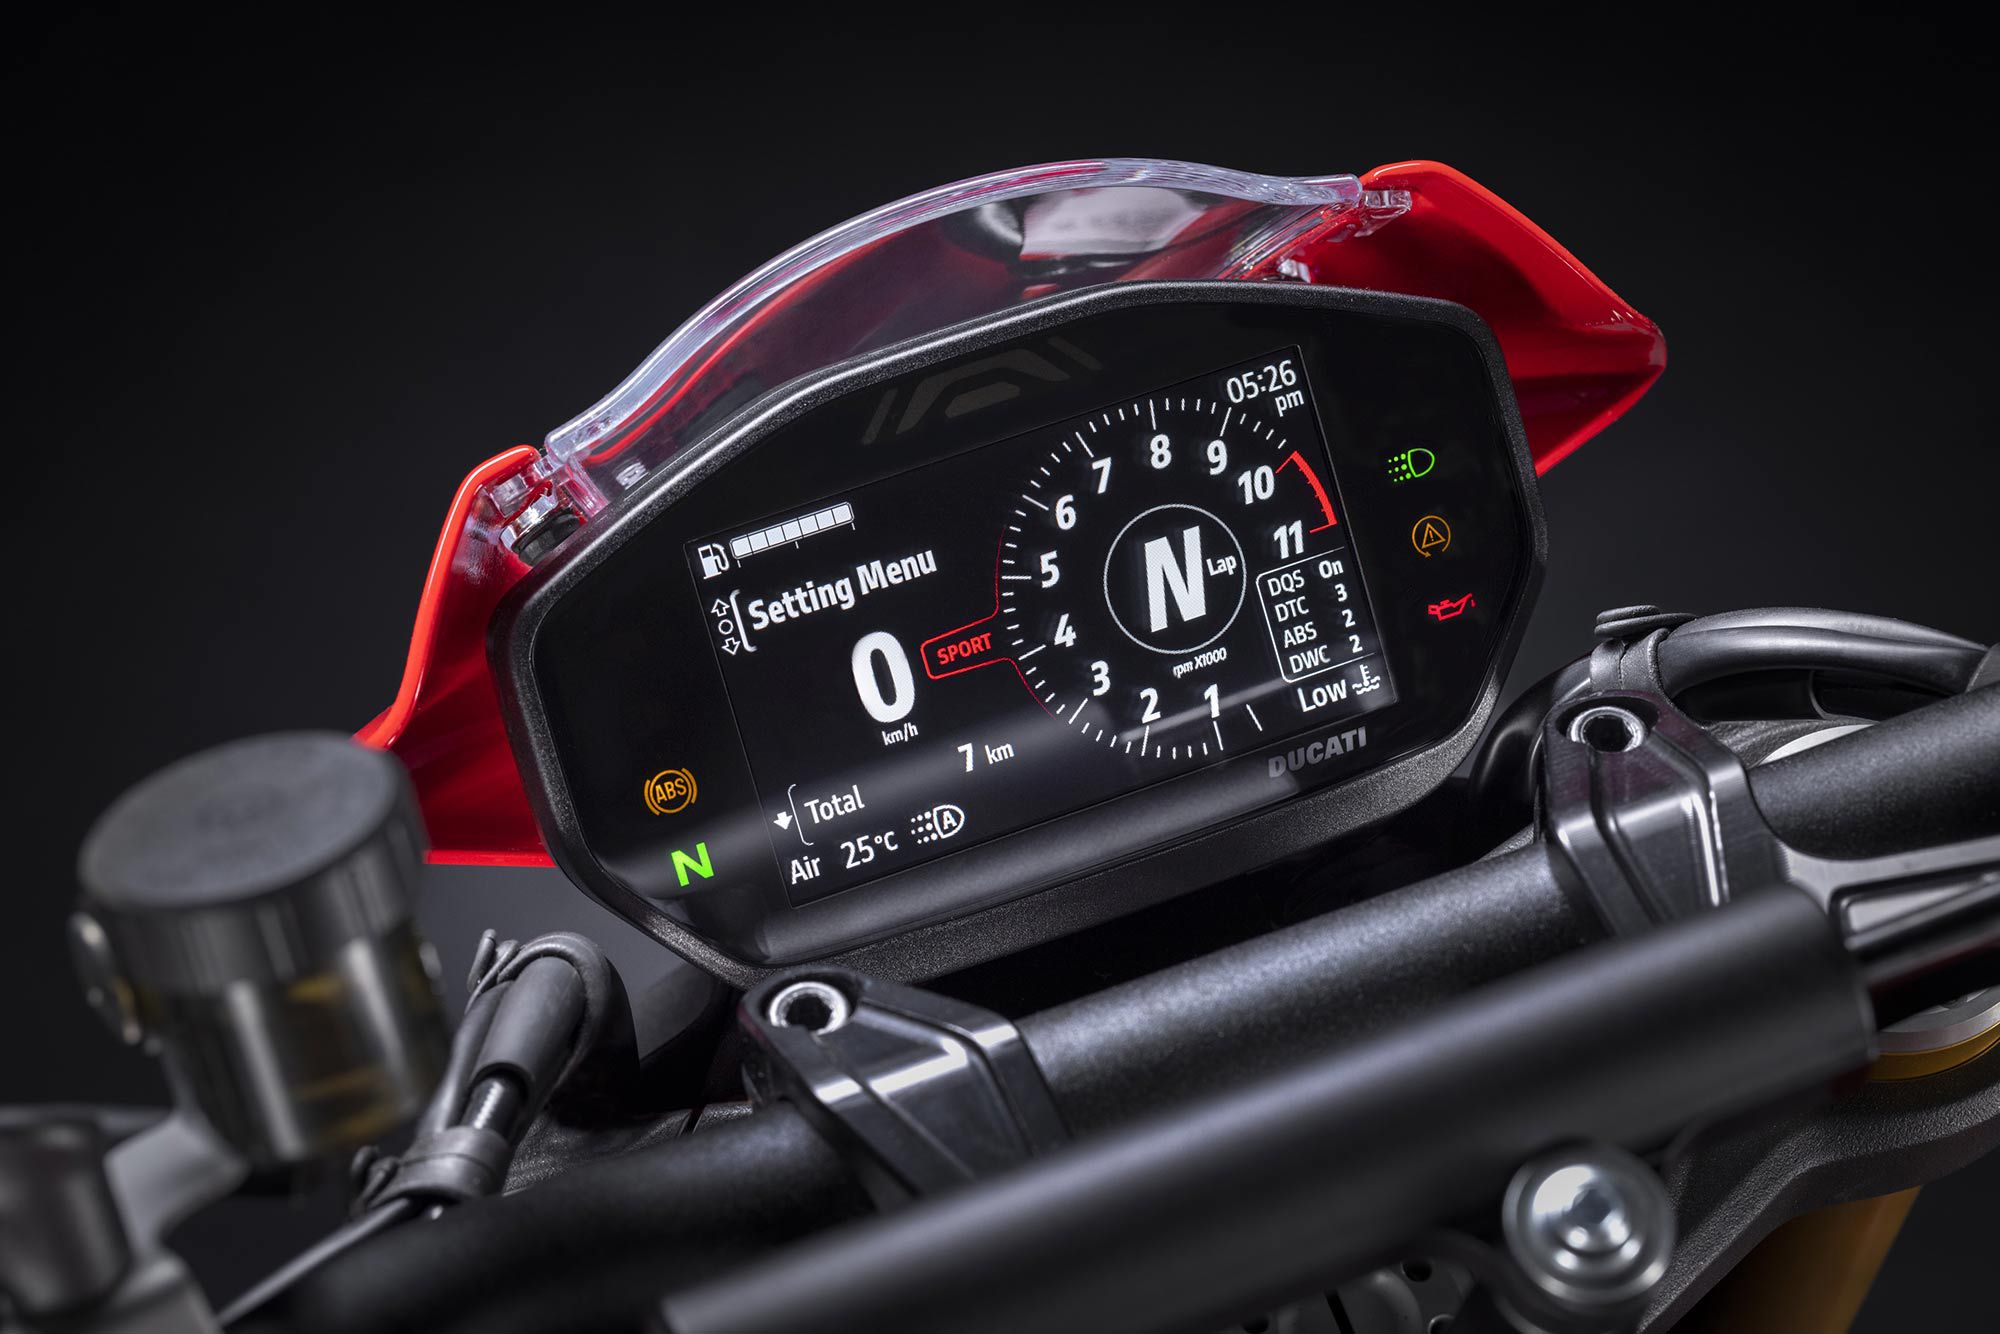 The 4.3-inch color TFT dash draws inspiration from the Panigale V4.